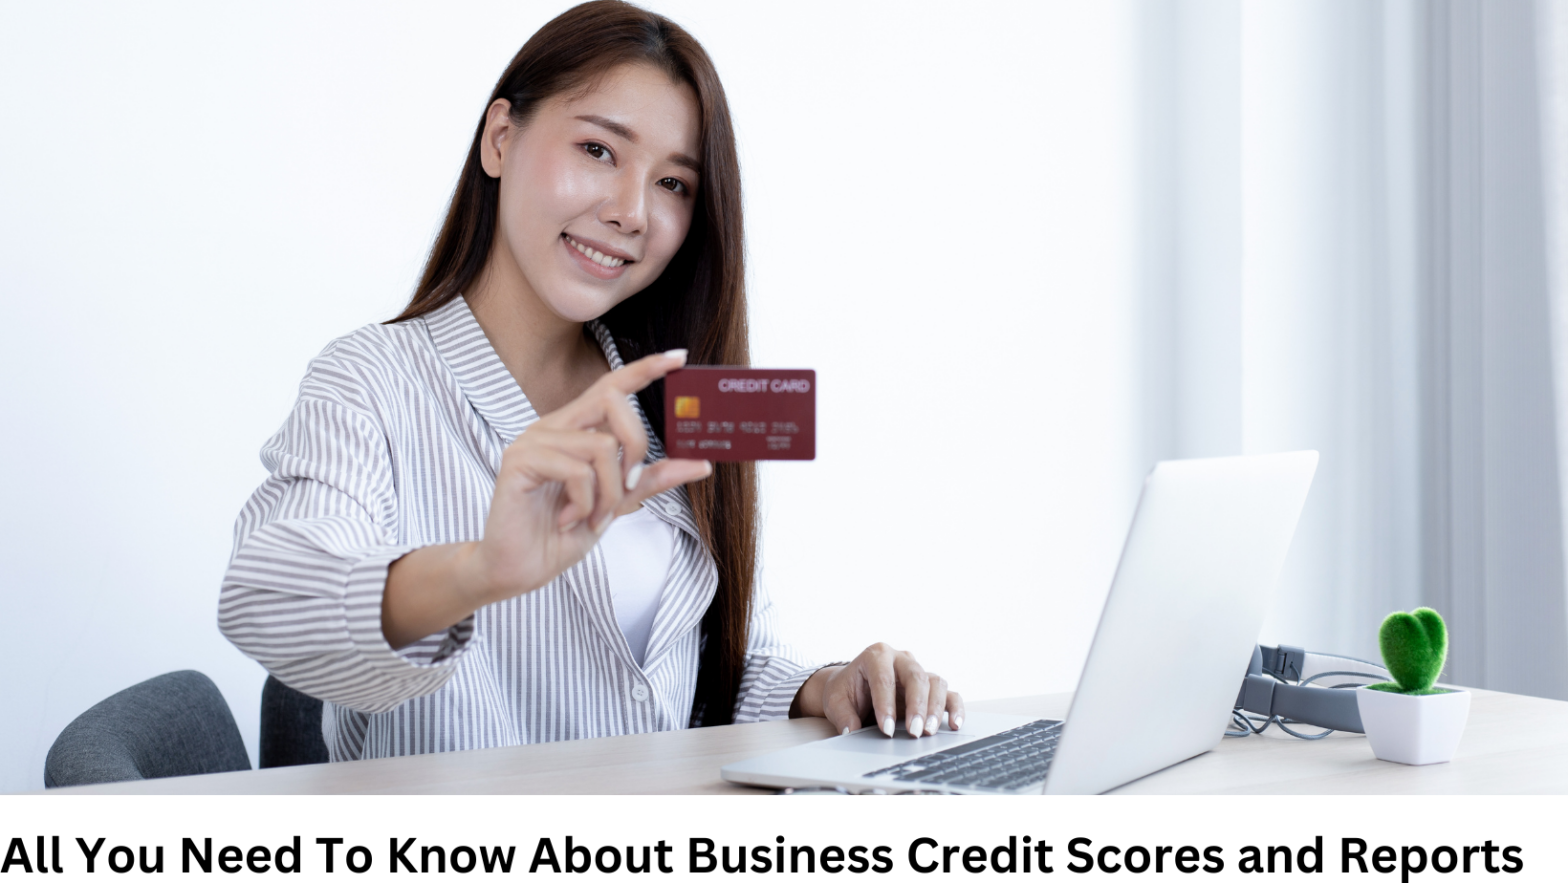 All You Need to Know About Business Credit Scores and Reports